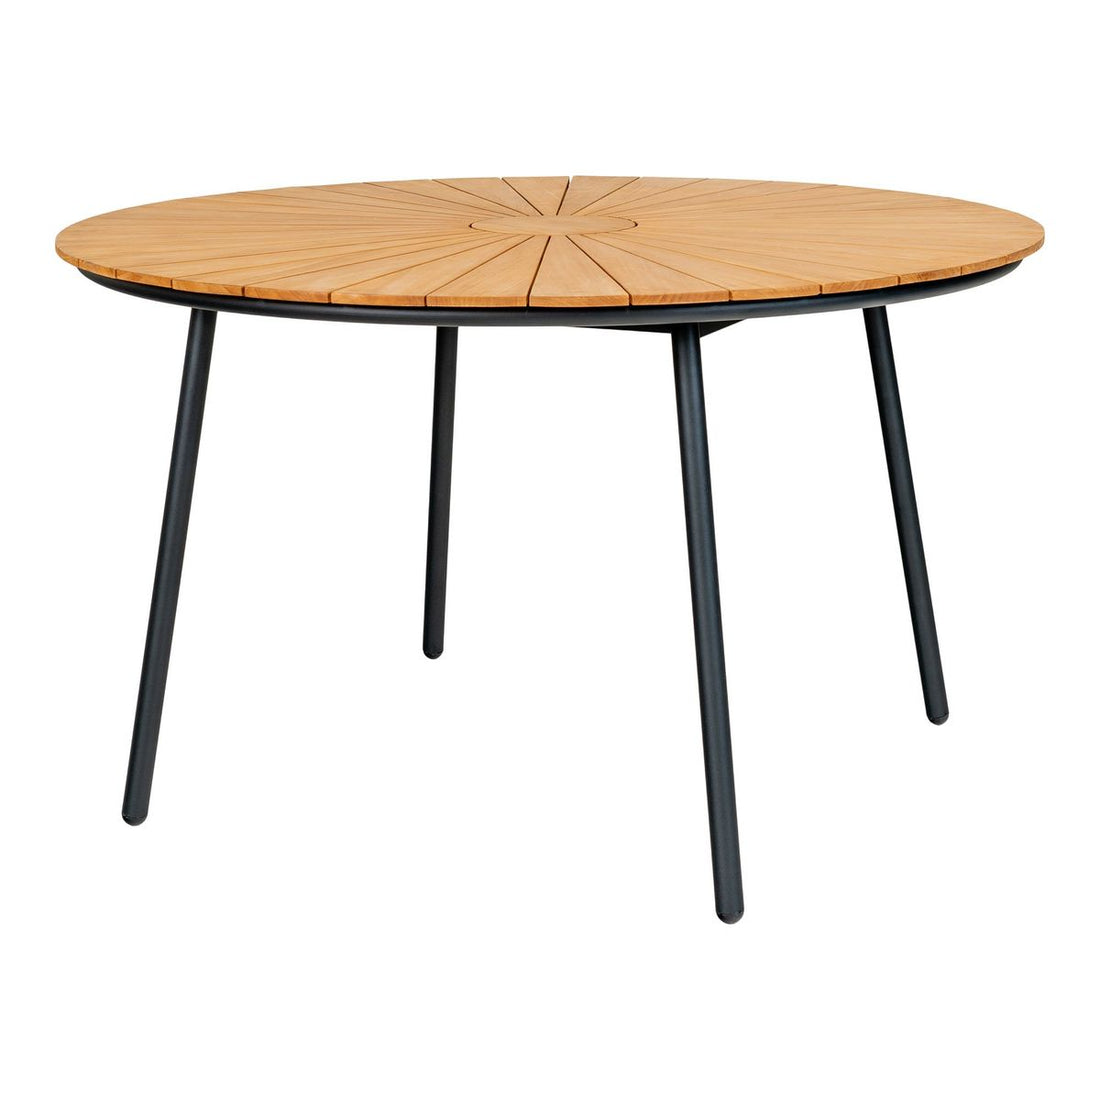 House Nordic Cleveland Dining Table